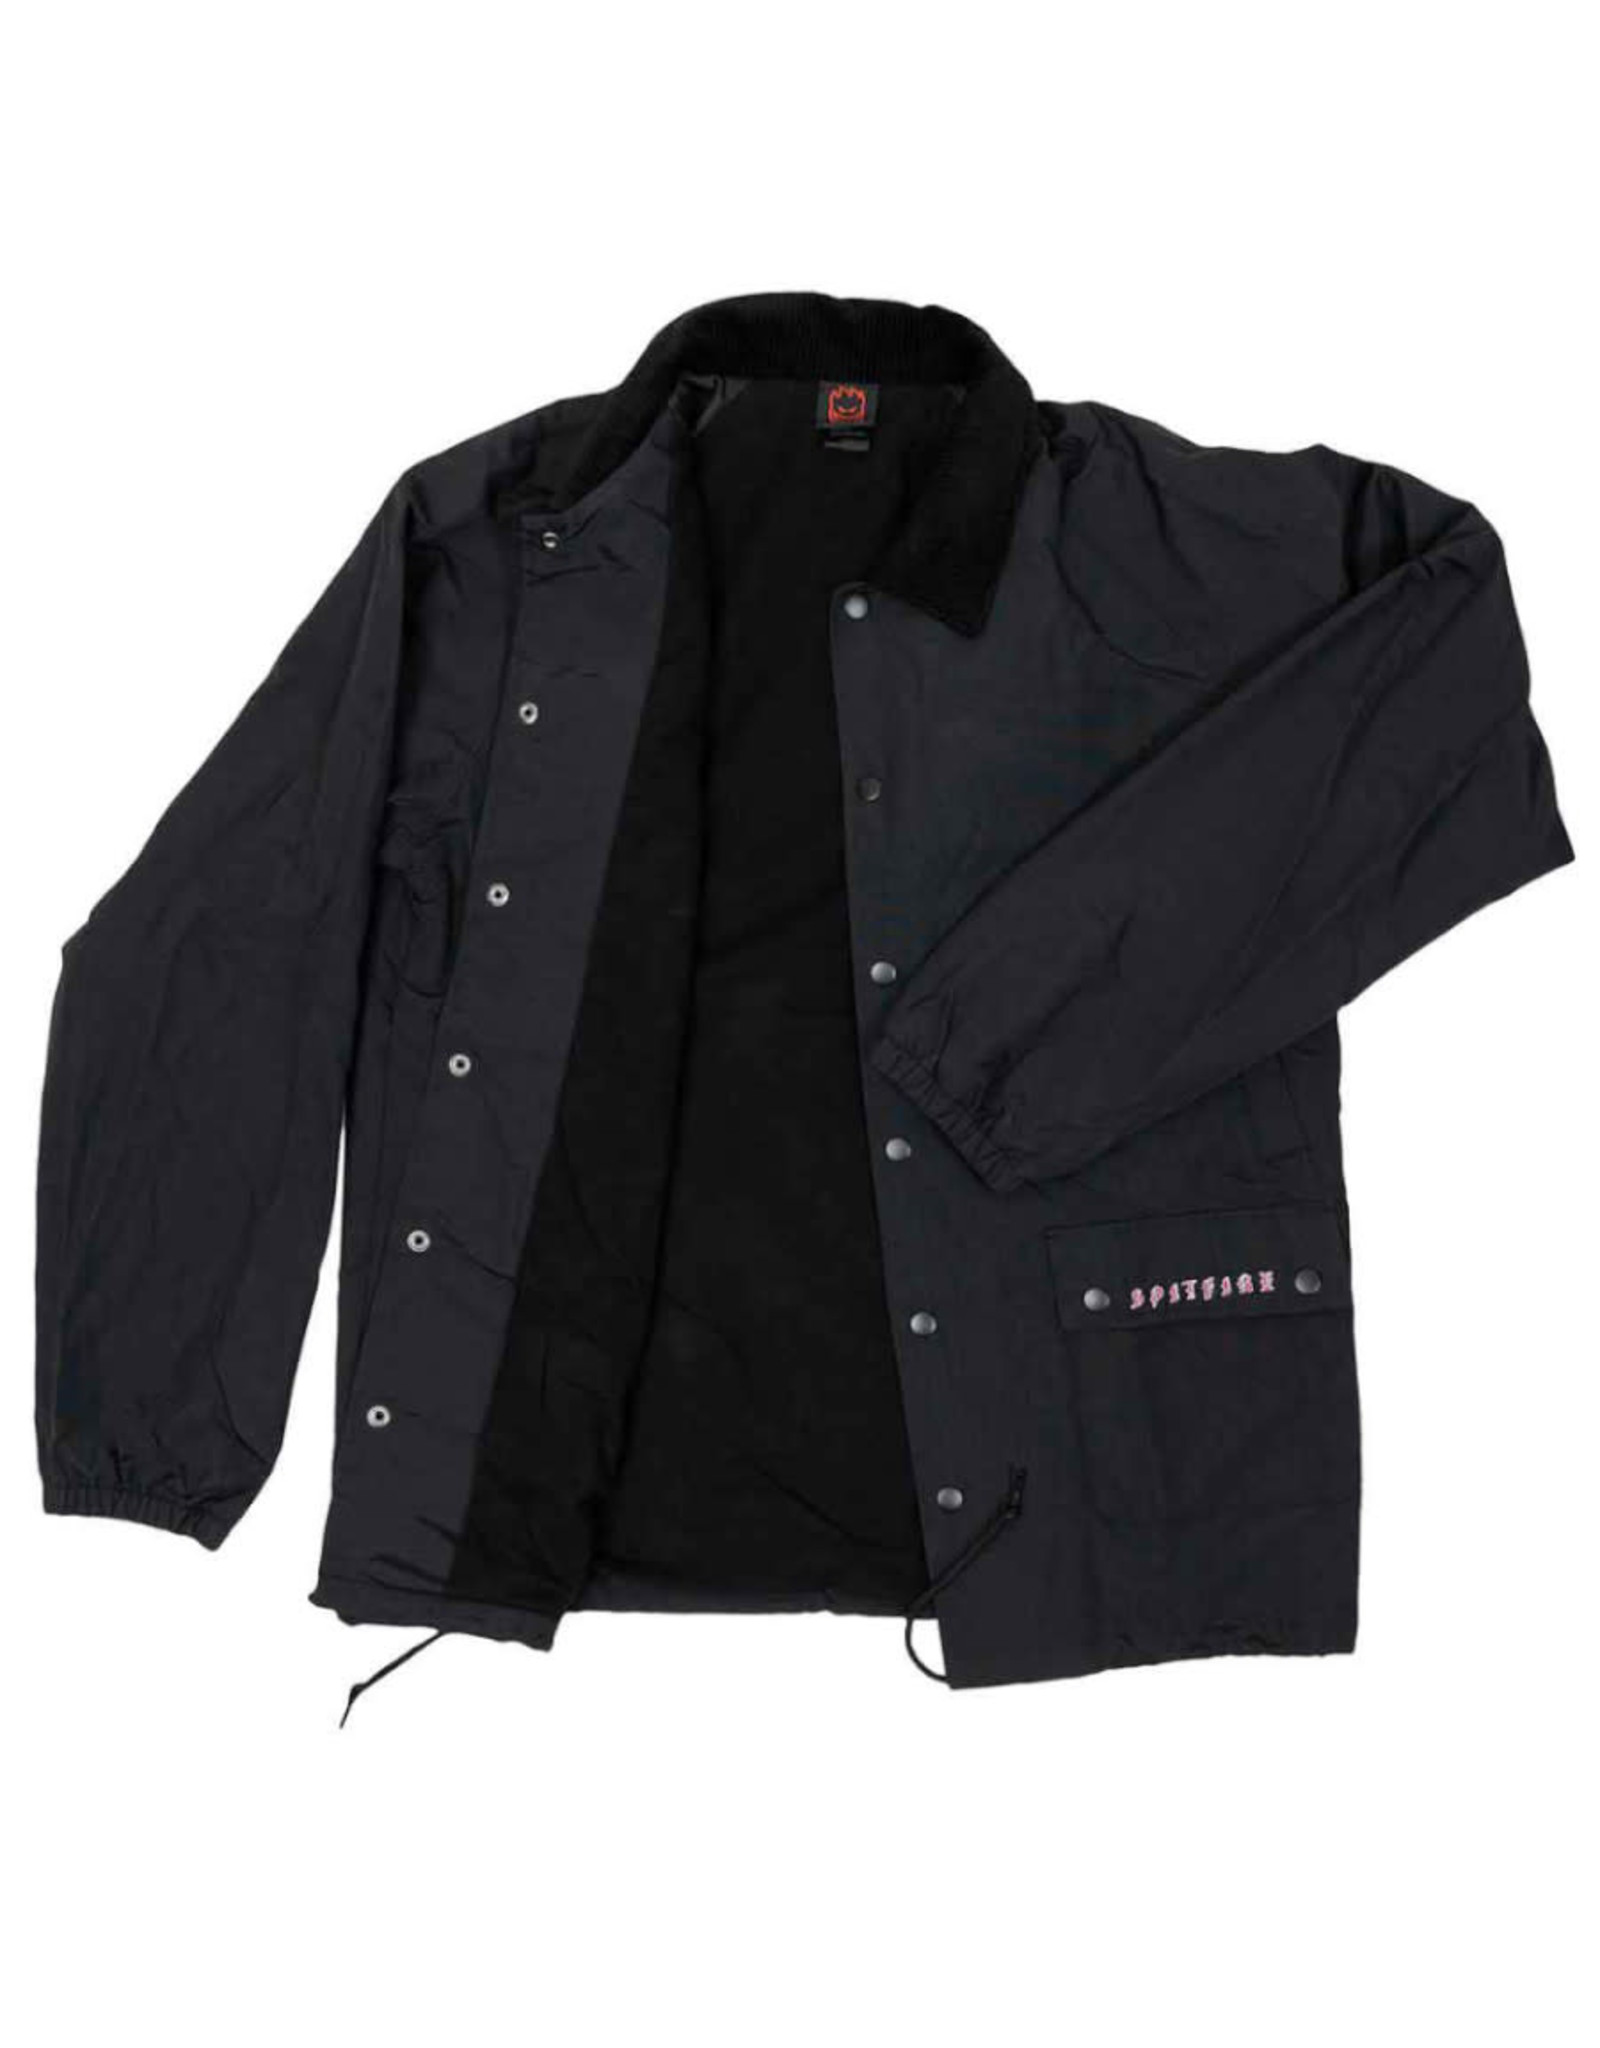 Spitfire Spitfire Jacket Old E Embroidery Button (Black/Red/White)